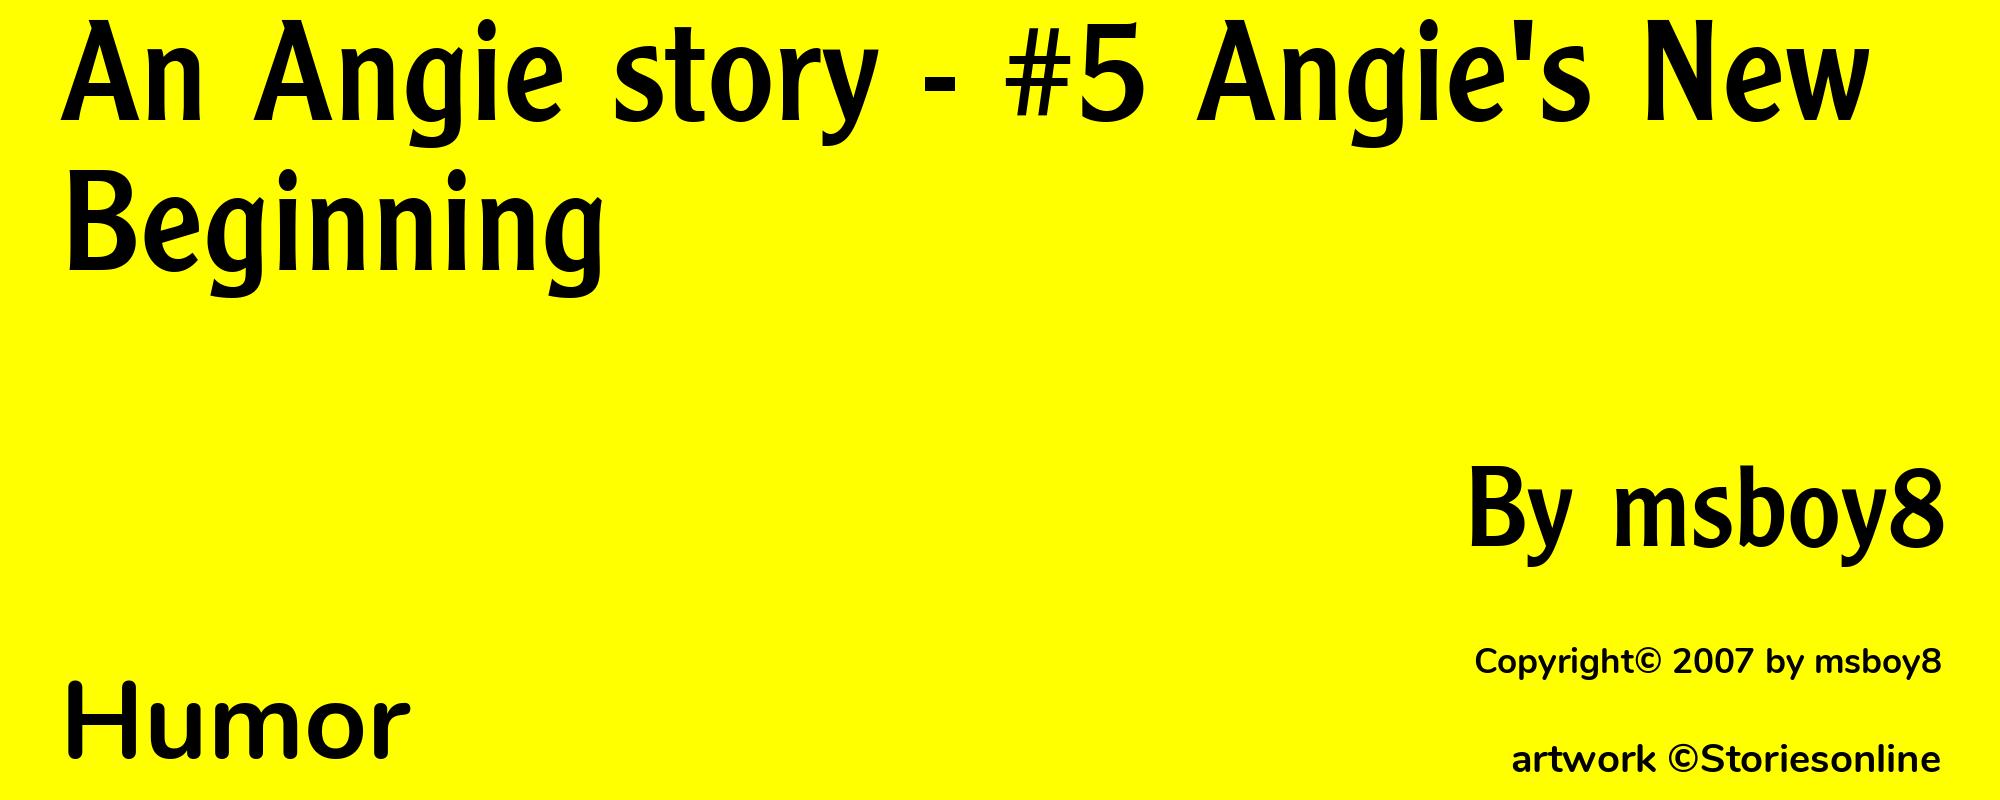 An Angie story - #5 Angie's New Beginning - Cover